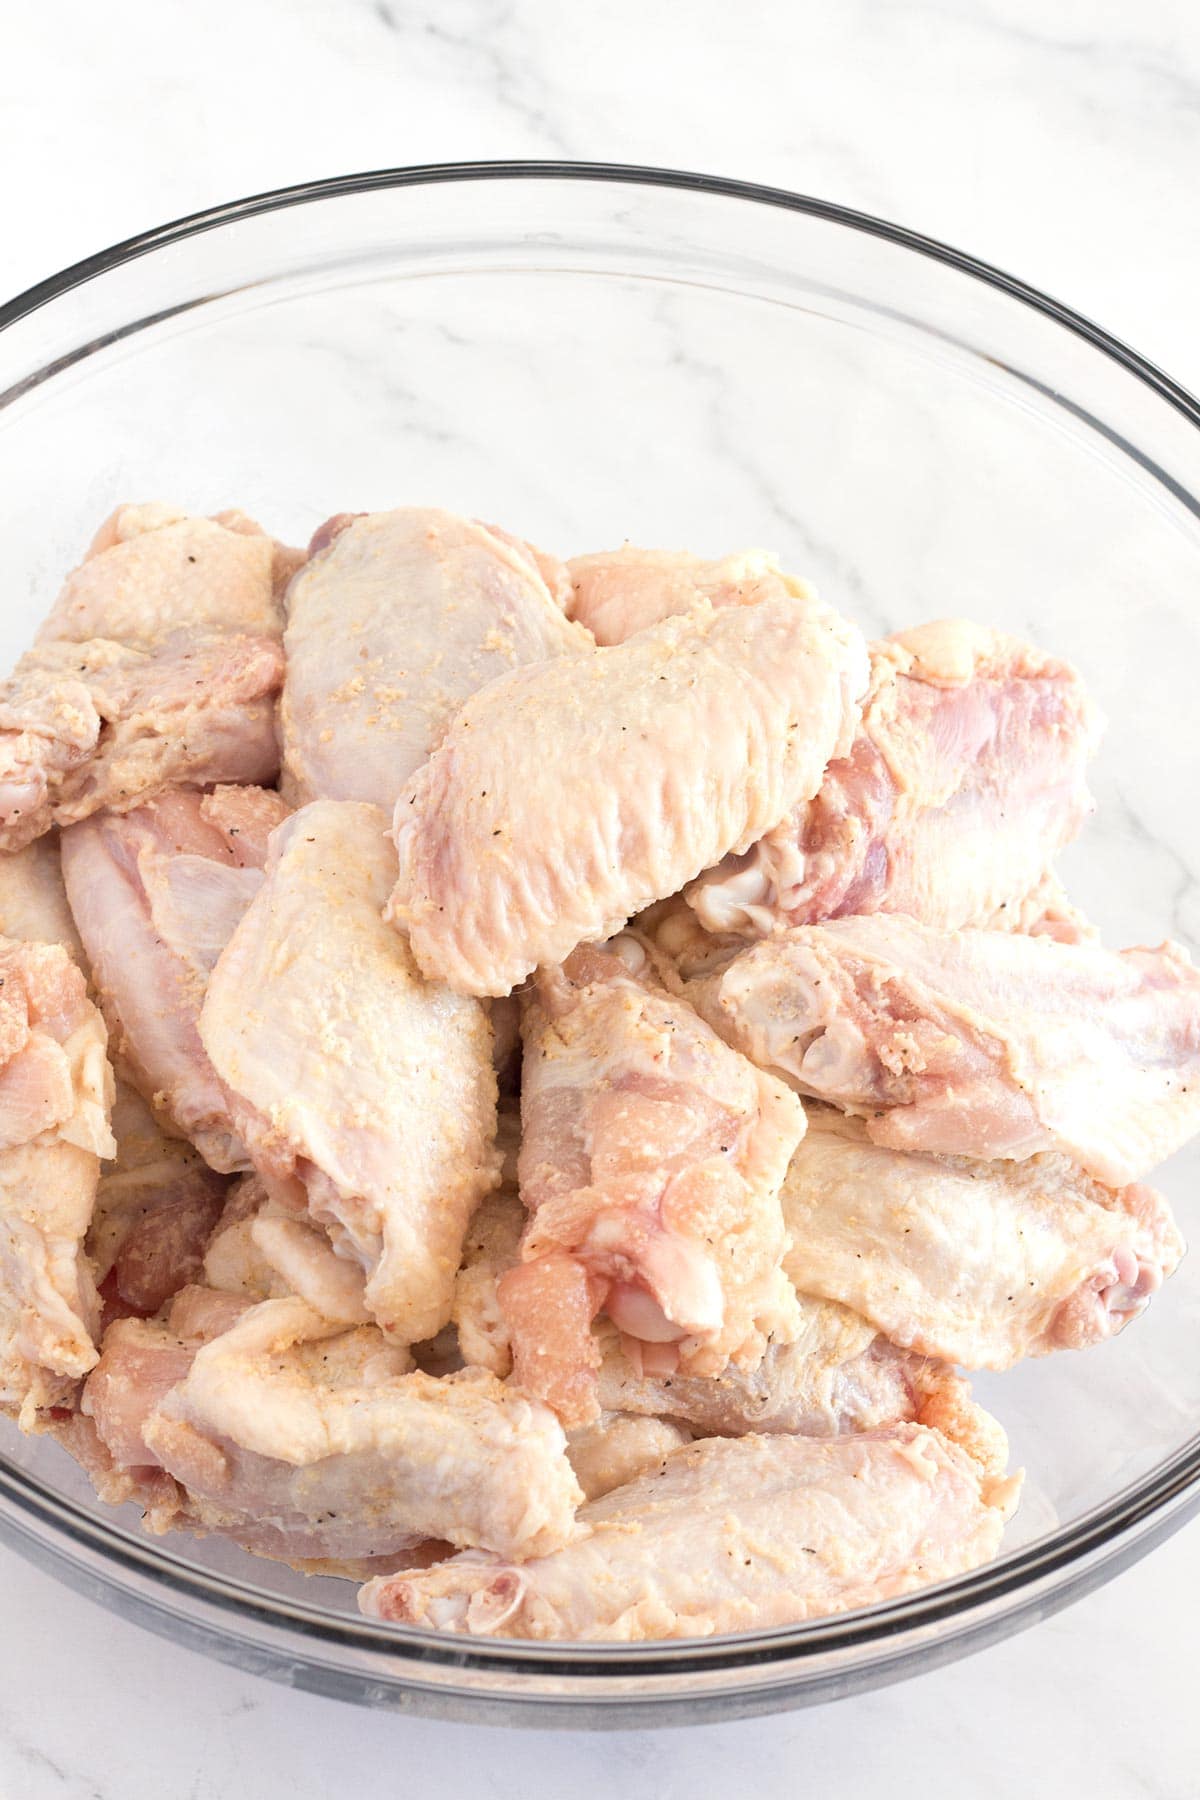 Chicken wings in a bowl tossed with baking powder and seasoning.